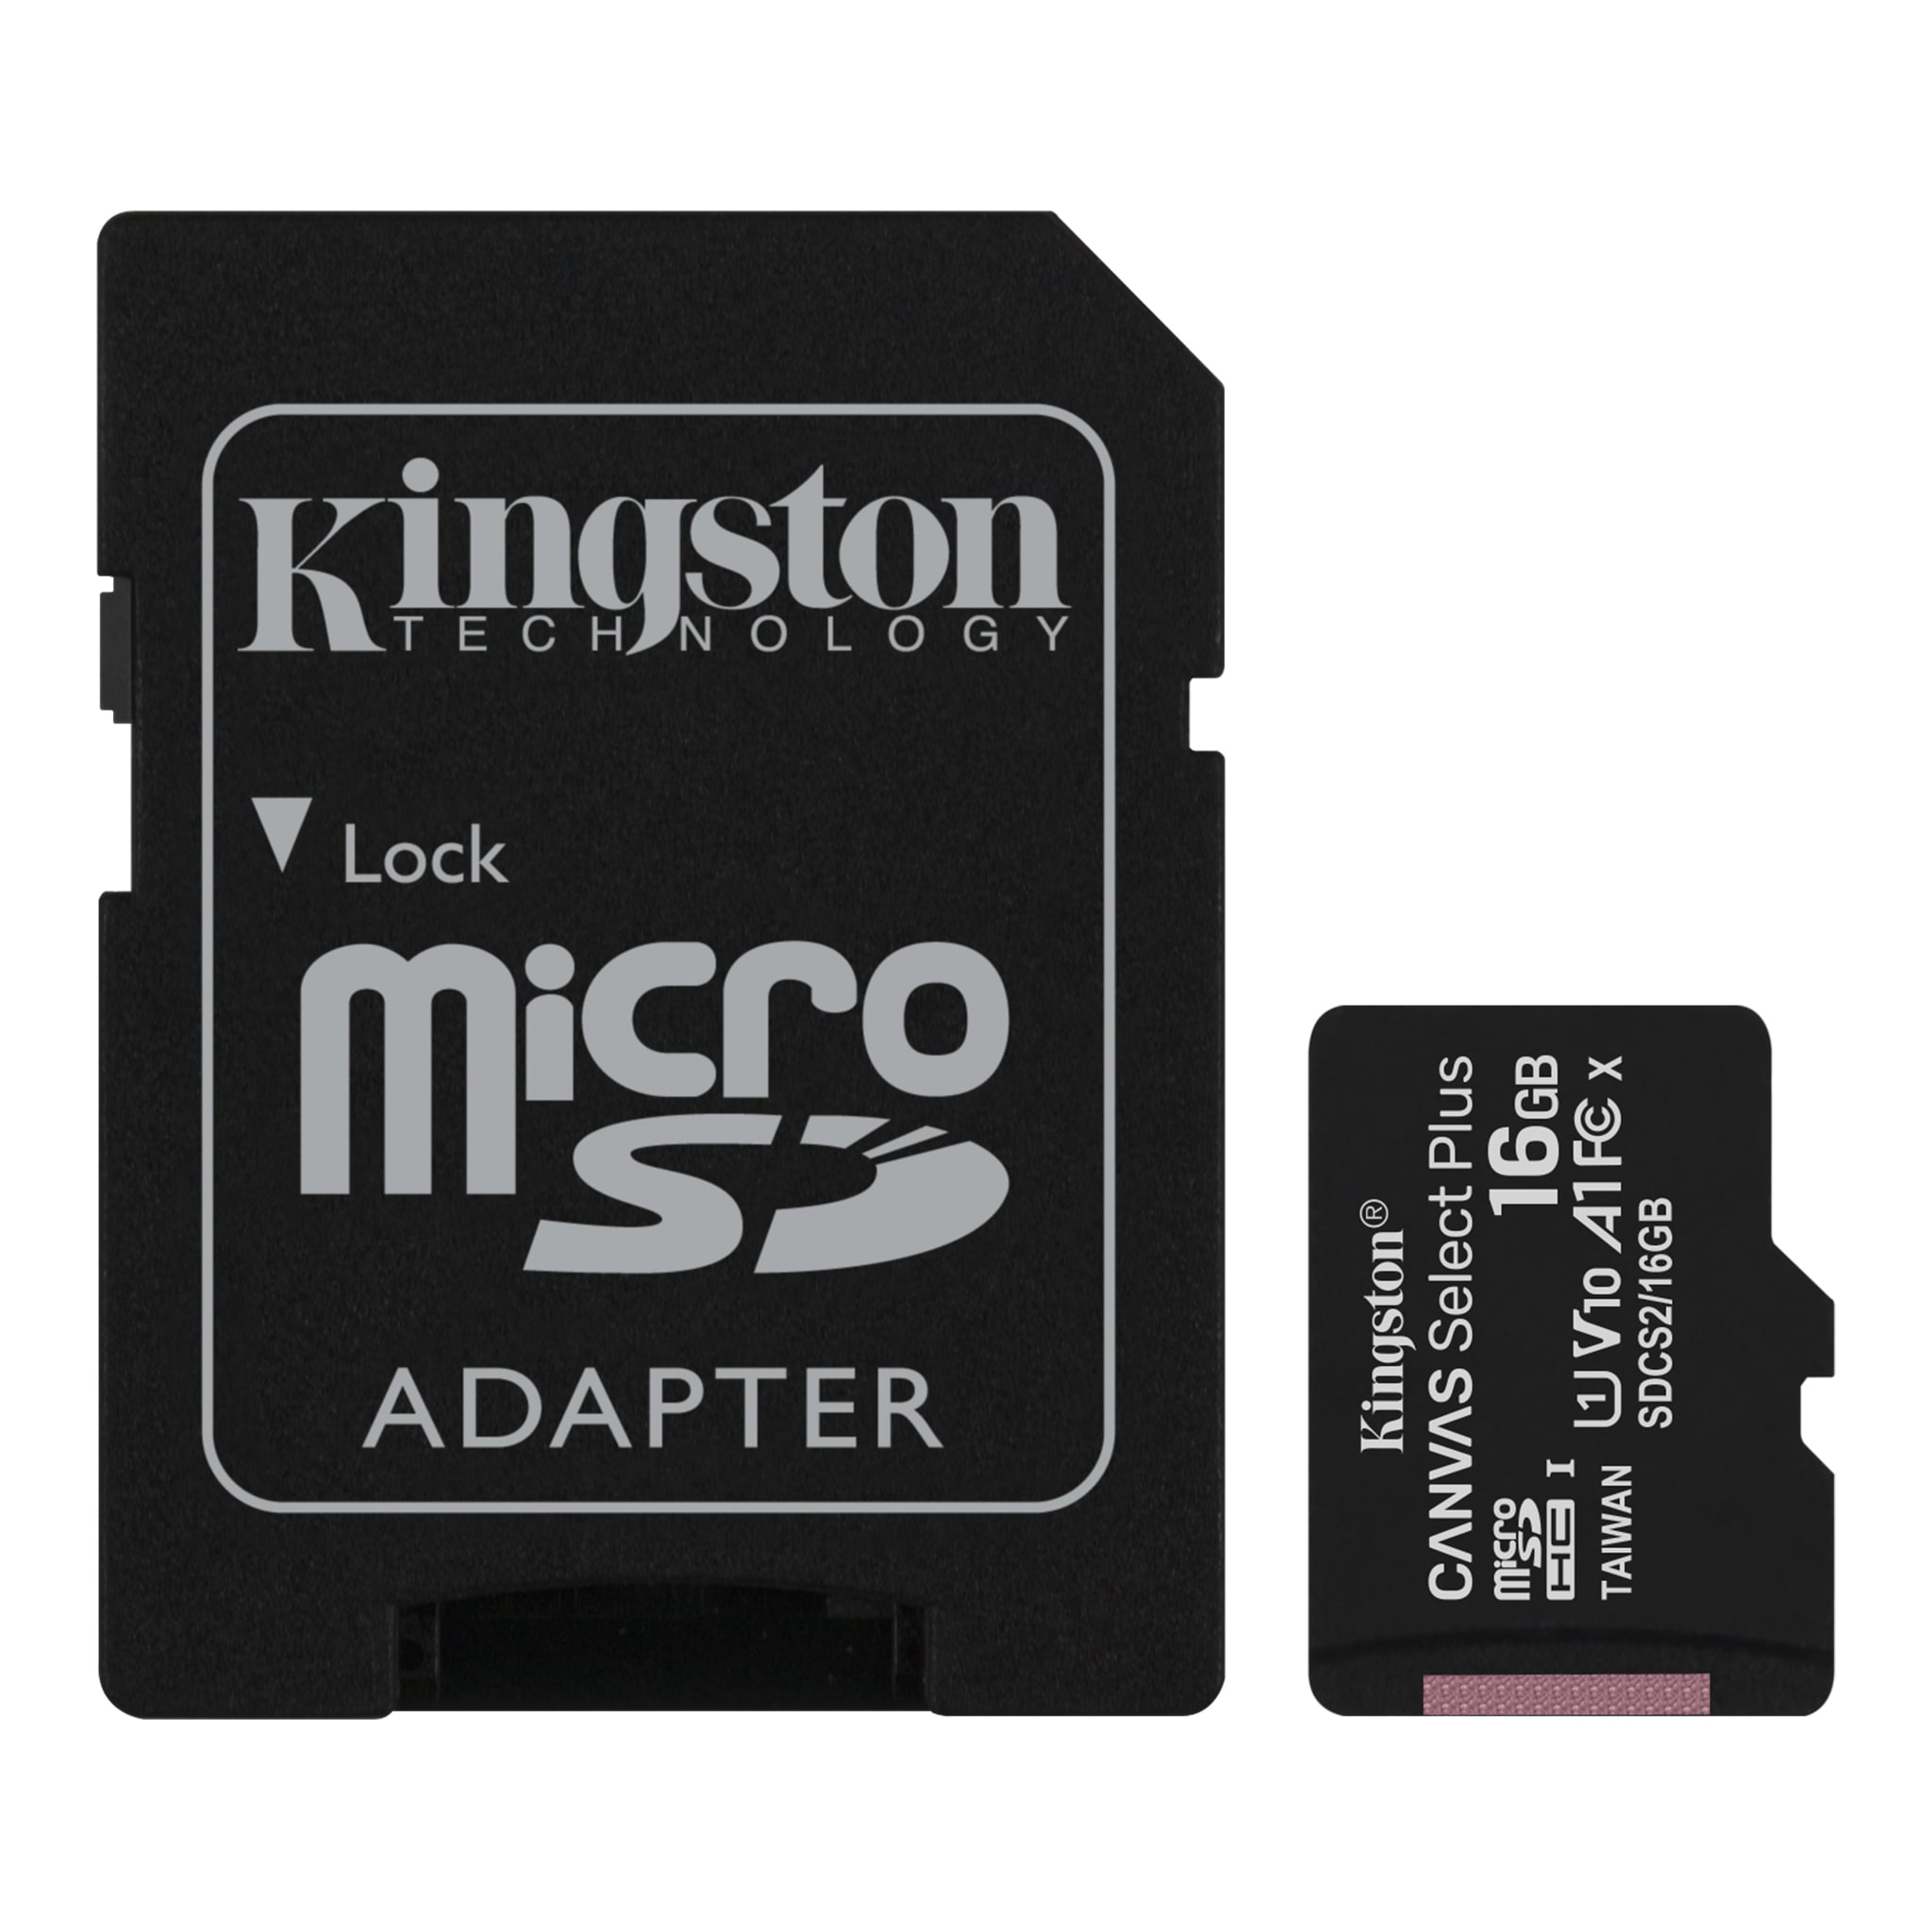 100MBs Works with Kingston Kingston 512GB Samsung SM-J337A MicroSDXC Canvas Select Plus Card Verified by SanFlash.